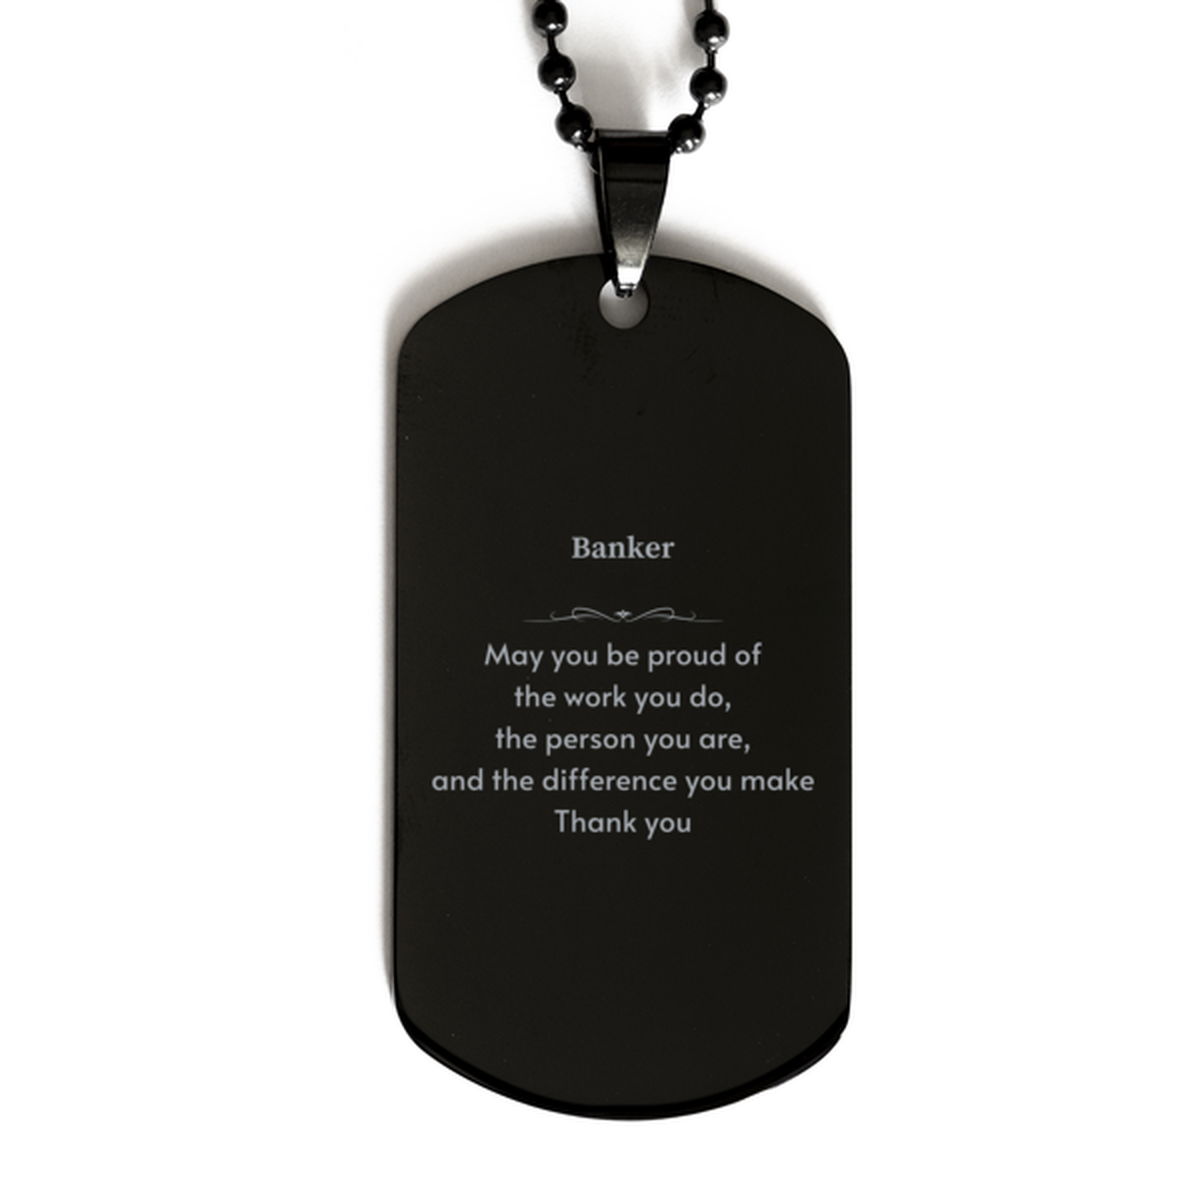 Heartwarming Black Dog Tag Retirement Coworkers Gifts for Banker, Banker May You be proud of the work you do, the person you are Gifts for Boss Men Women Friends